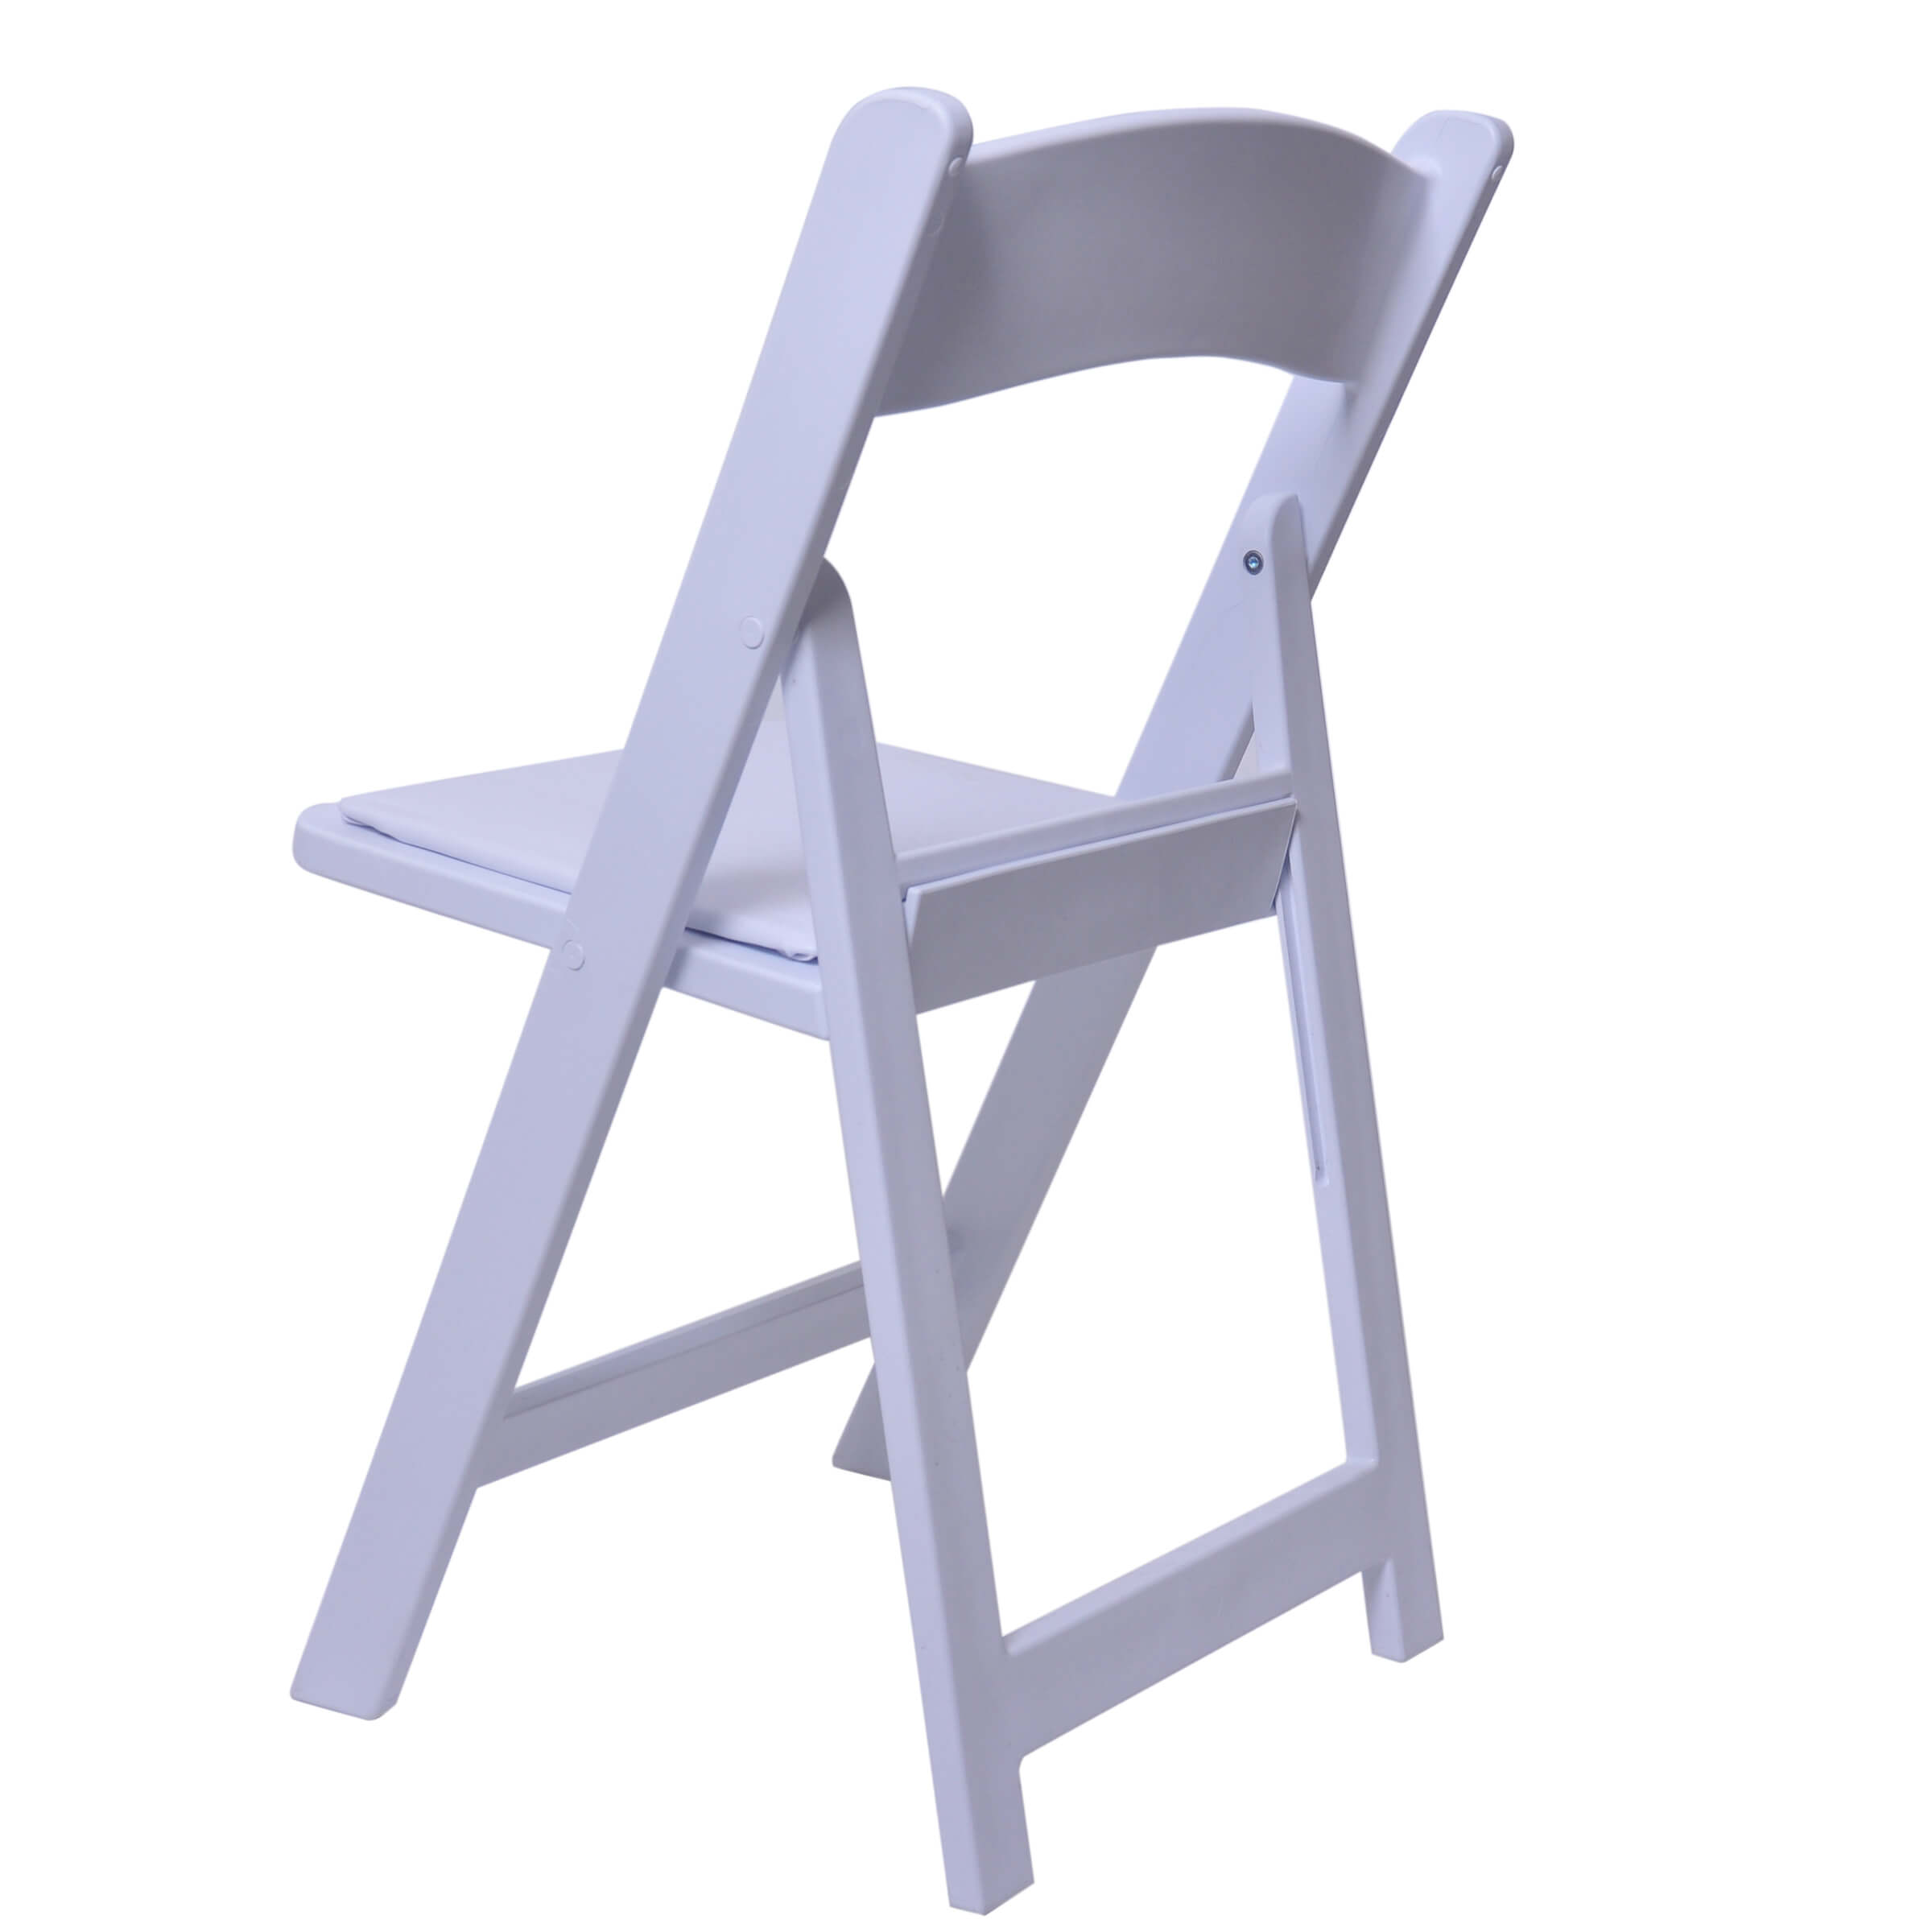 White Resin Folding Chairs Wholesale | Cheap Wedding Chairs Factory